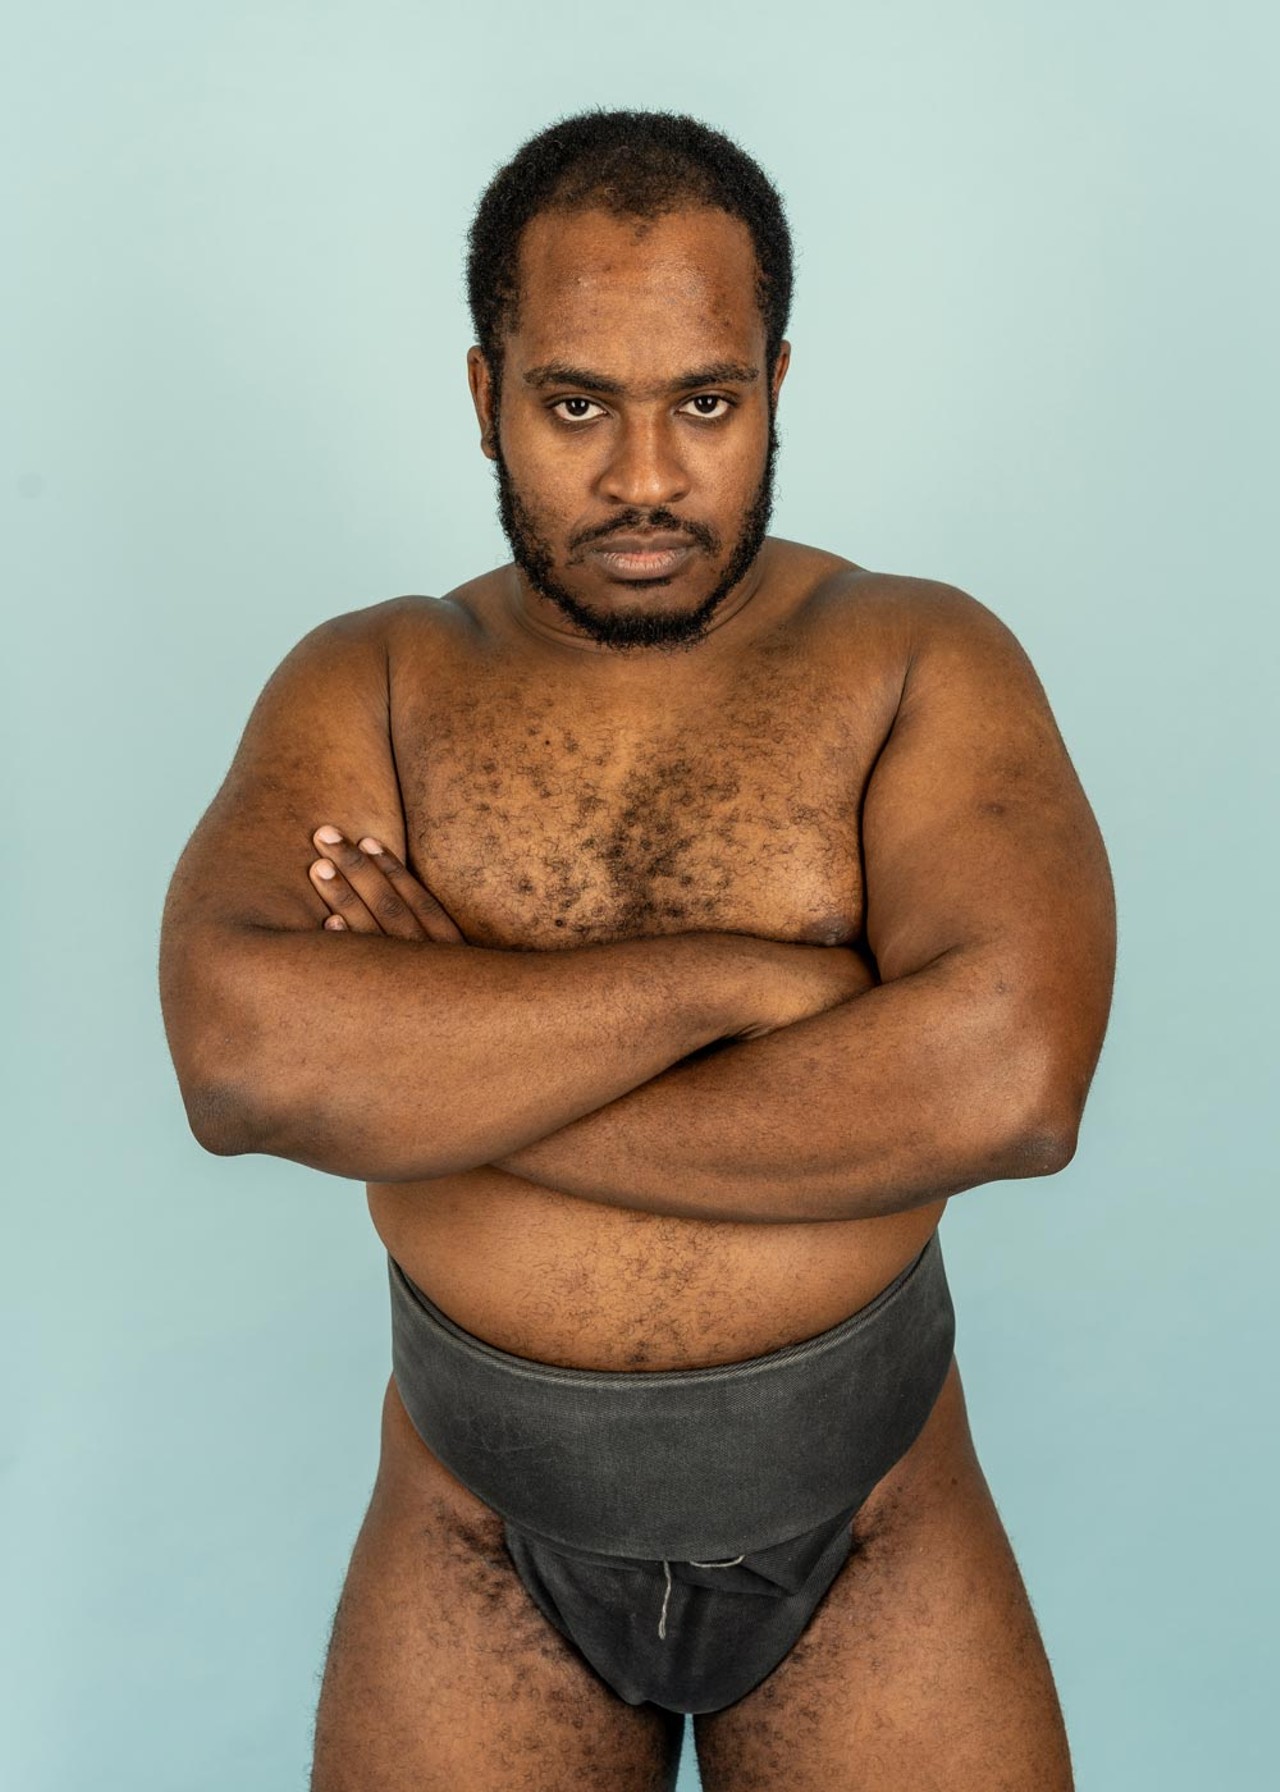 “In the end if you want to really do something, sometimes you just have to be OK with doing it yourself,” says Florida Sumo founder Cornelius Booker.